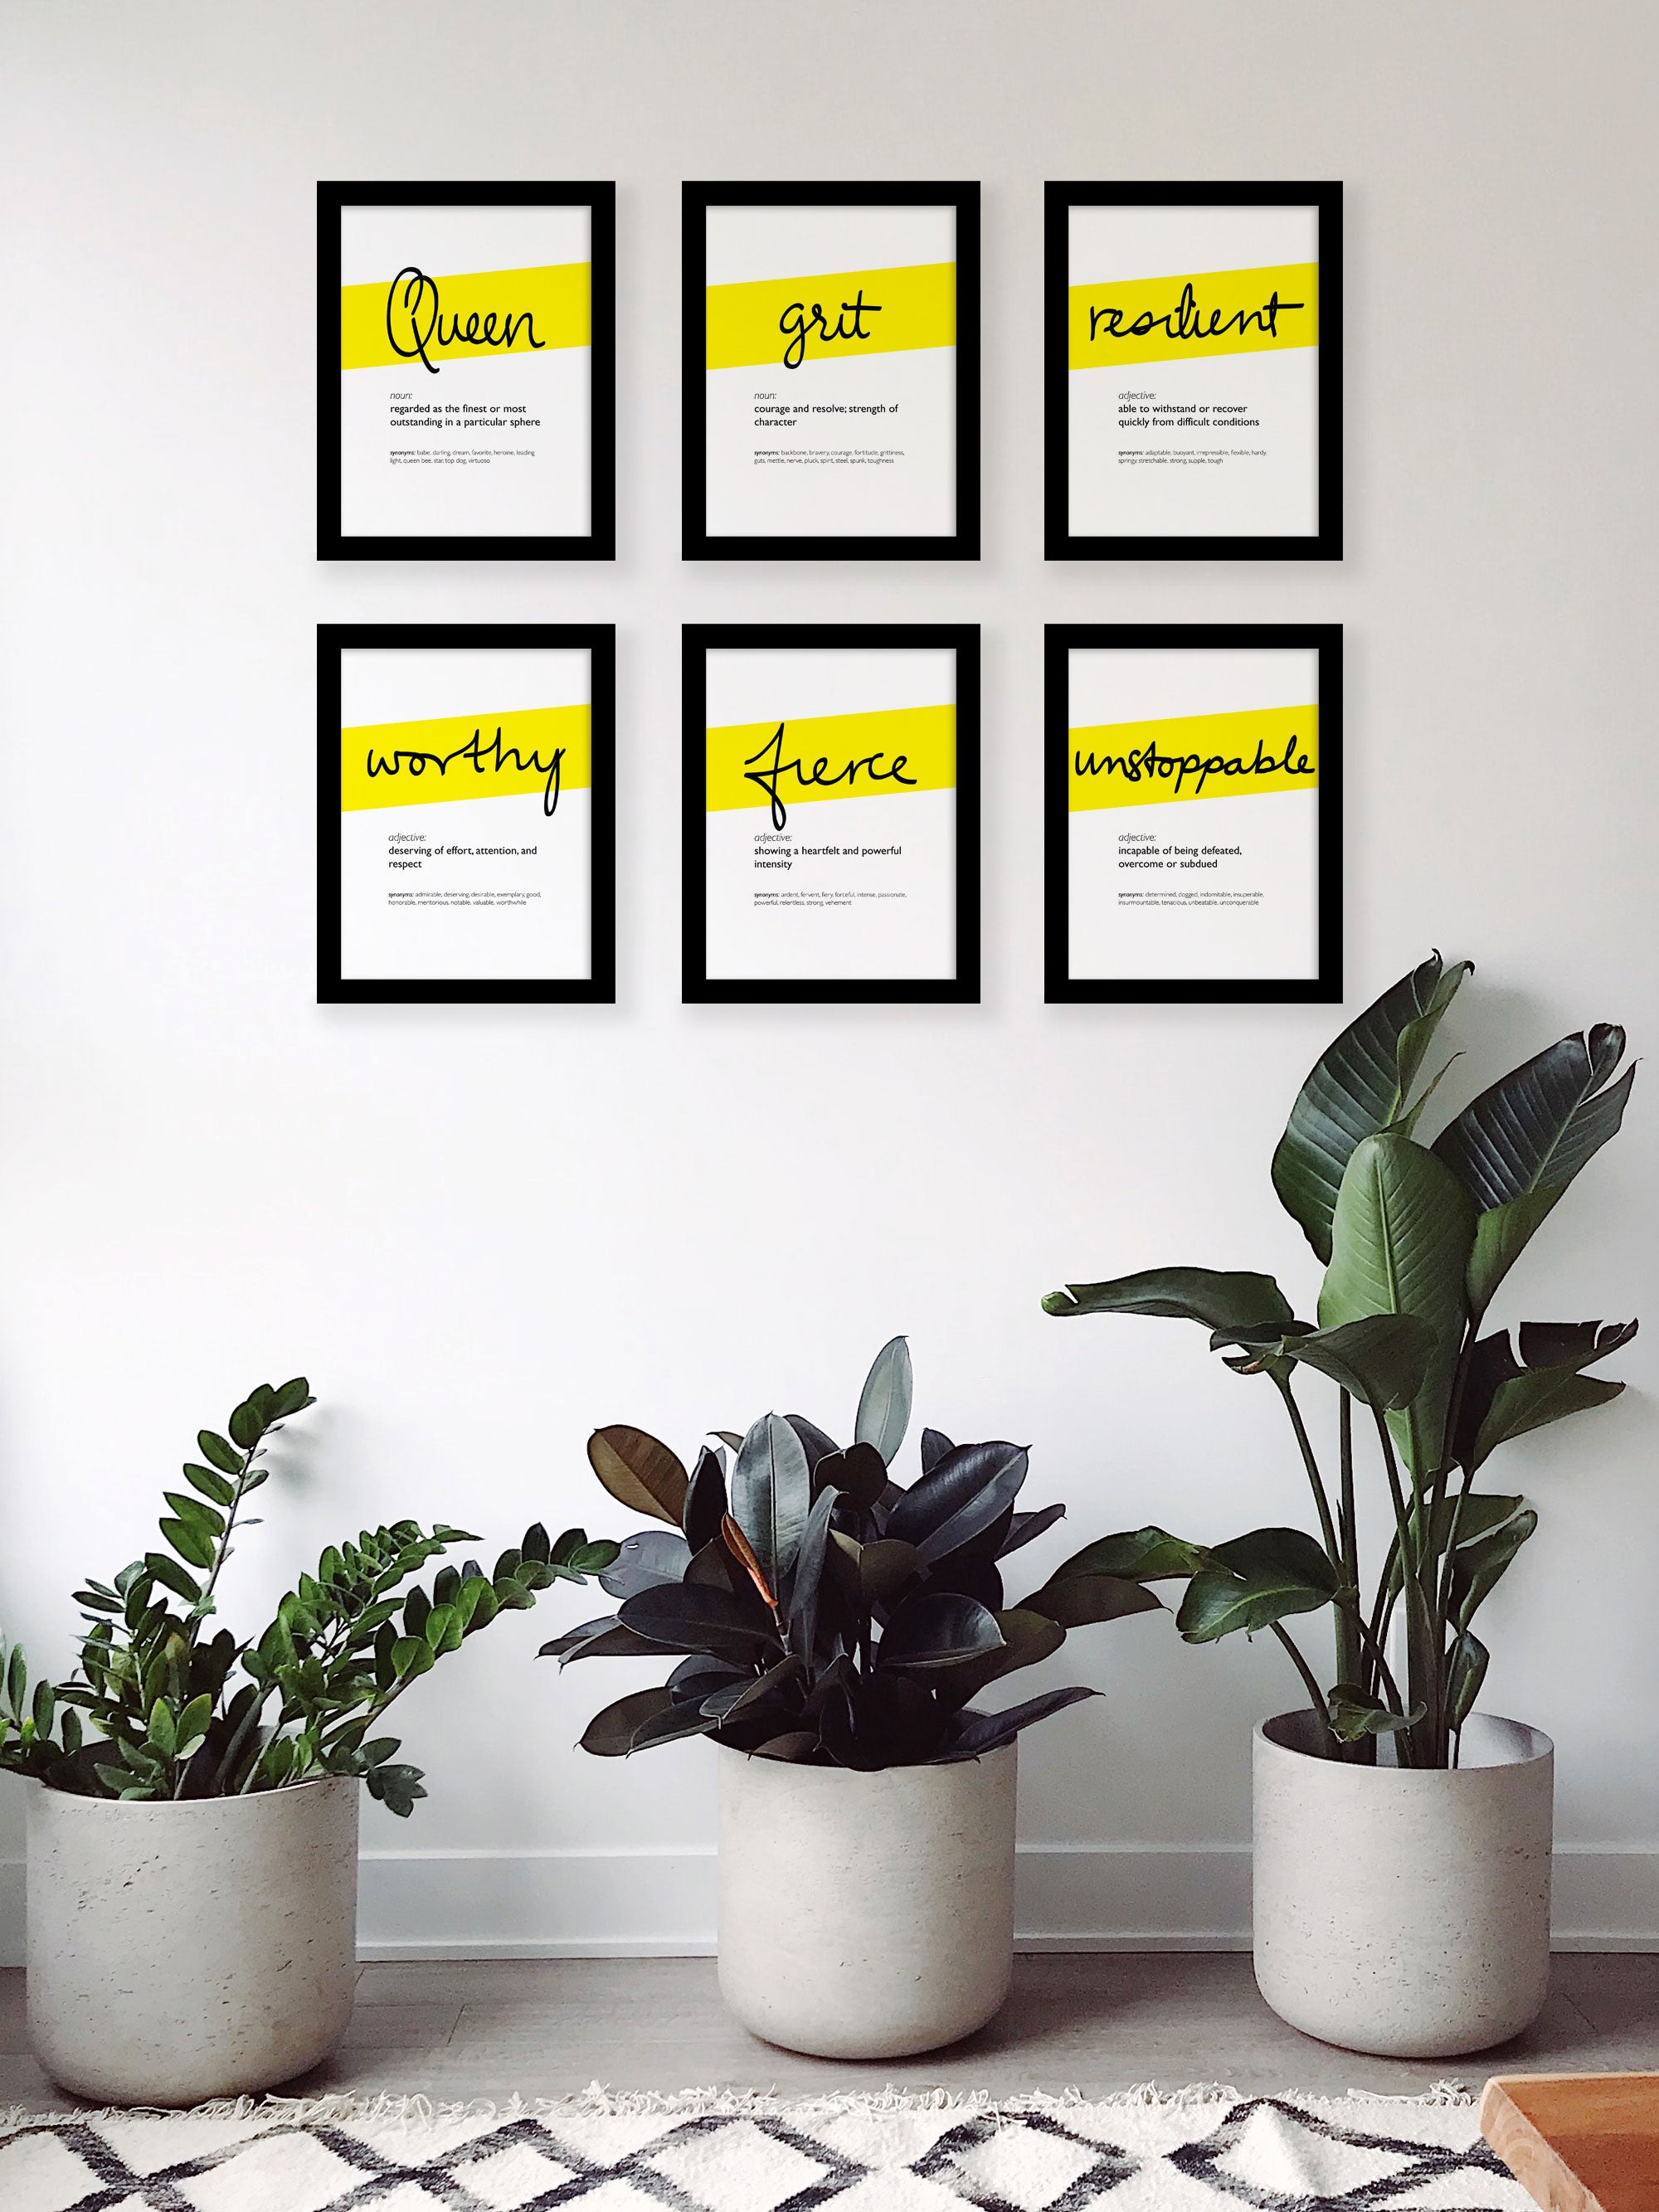 Framed Yellow Resilient Print With Word Definition - High Quality, Affordable, Hand Written, Empowering, Self Love, Mantra Word Print. Archival-Quality, Matte Giclée Print - Brevity Jewelry